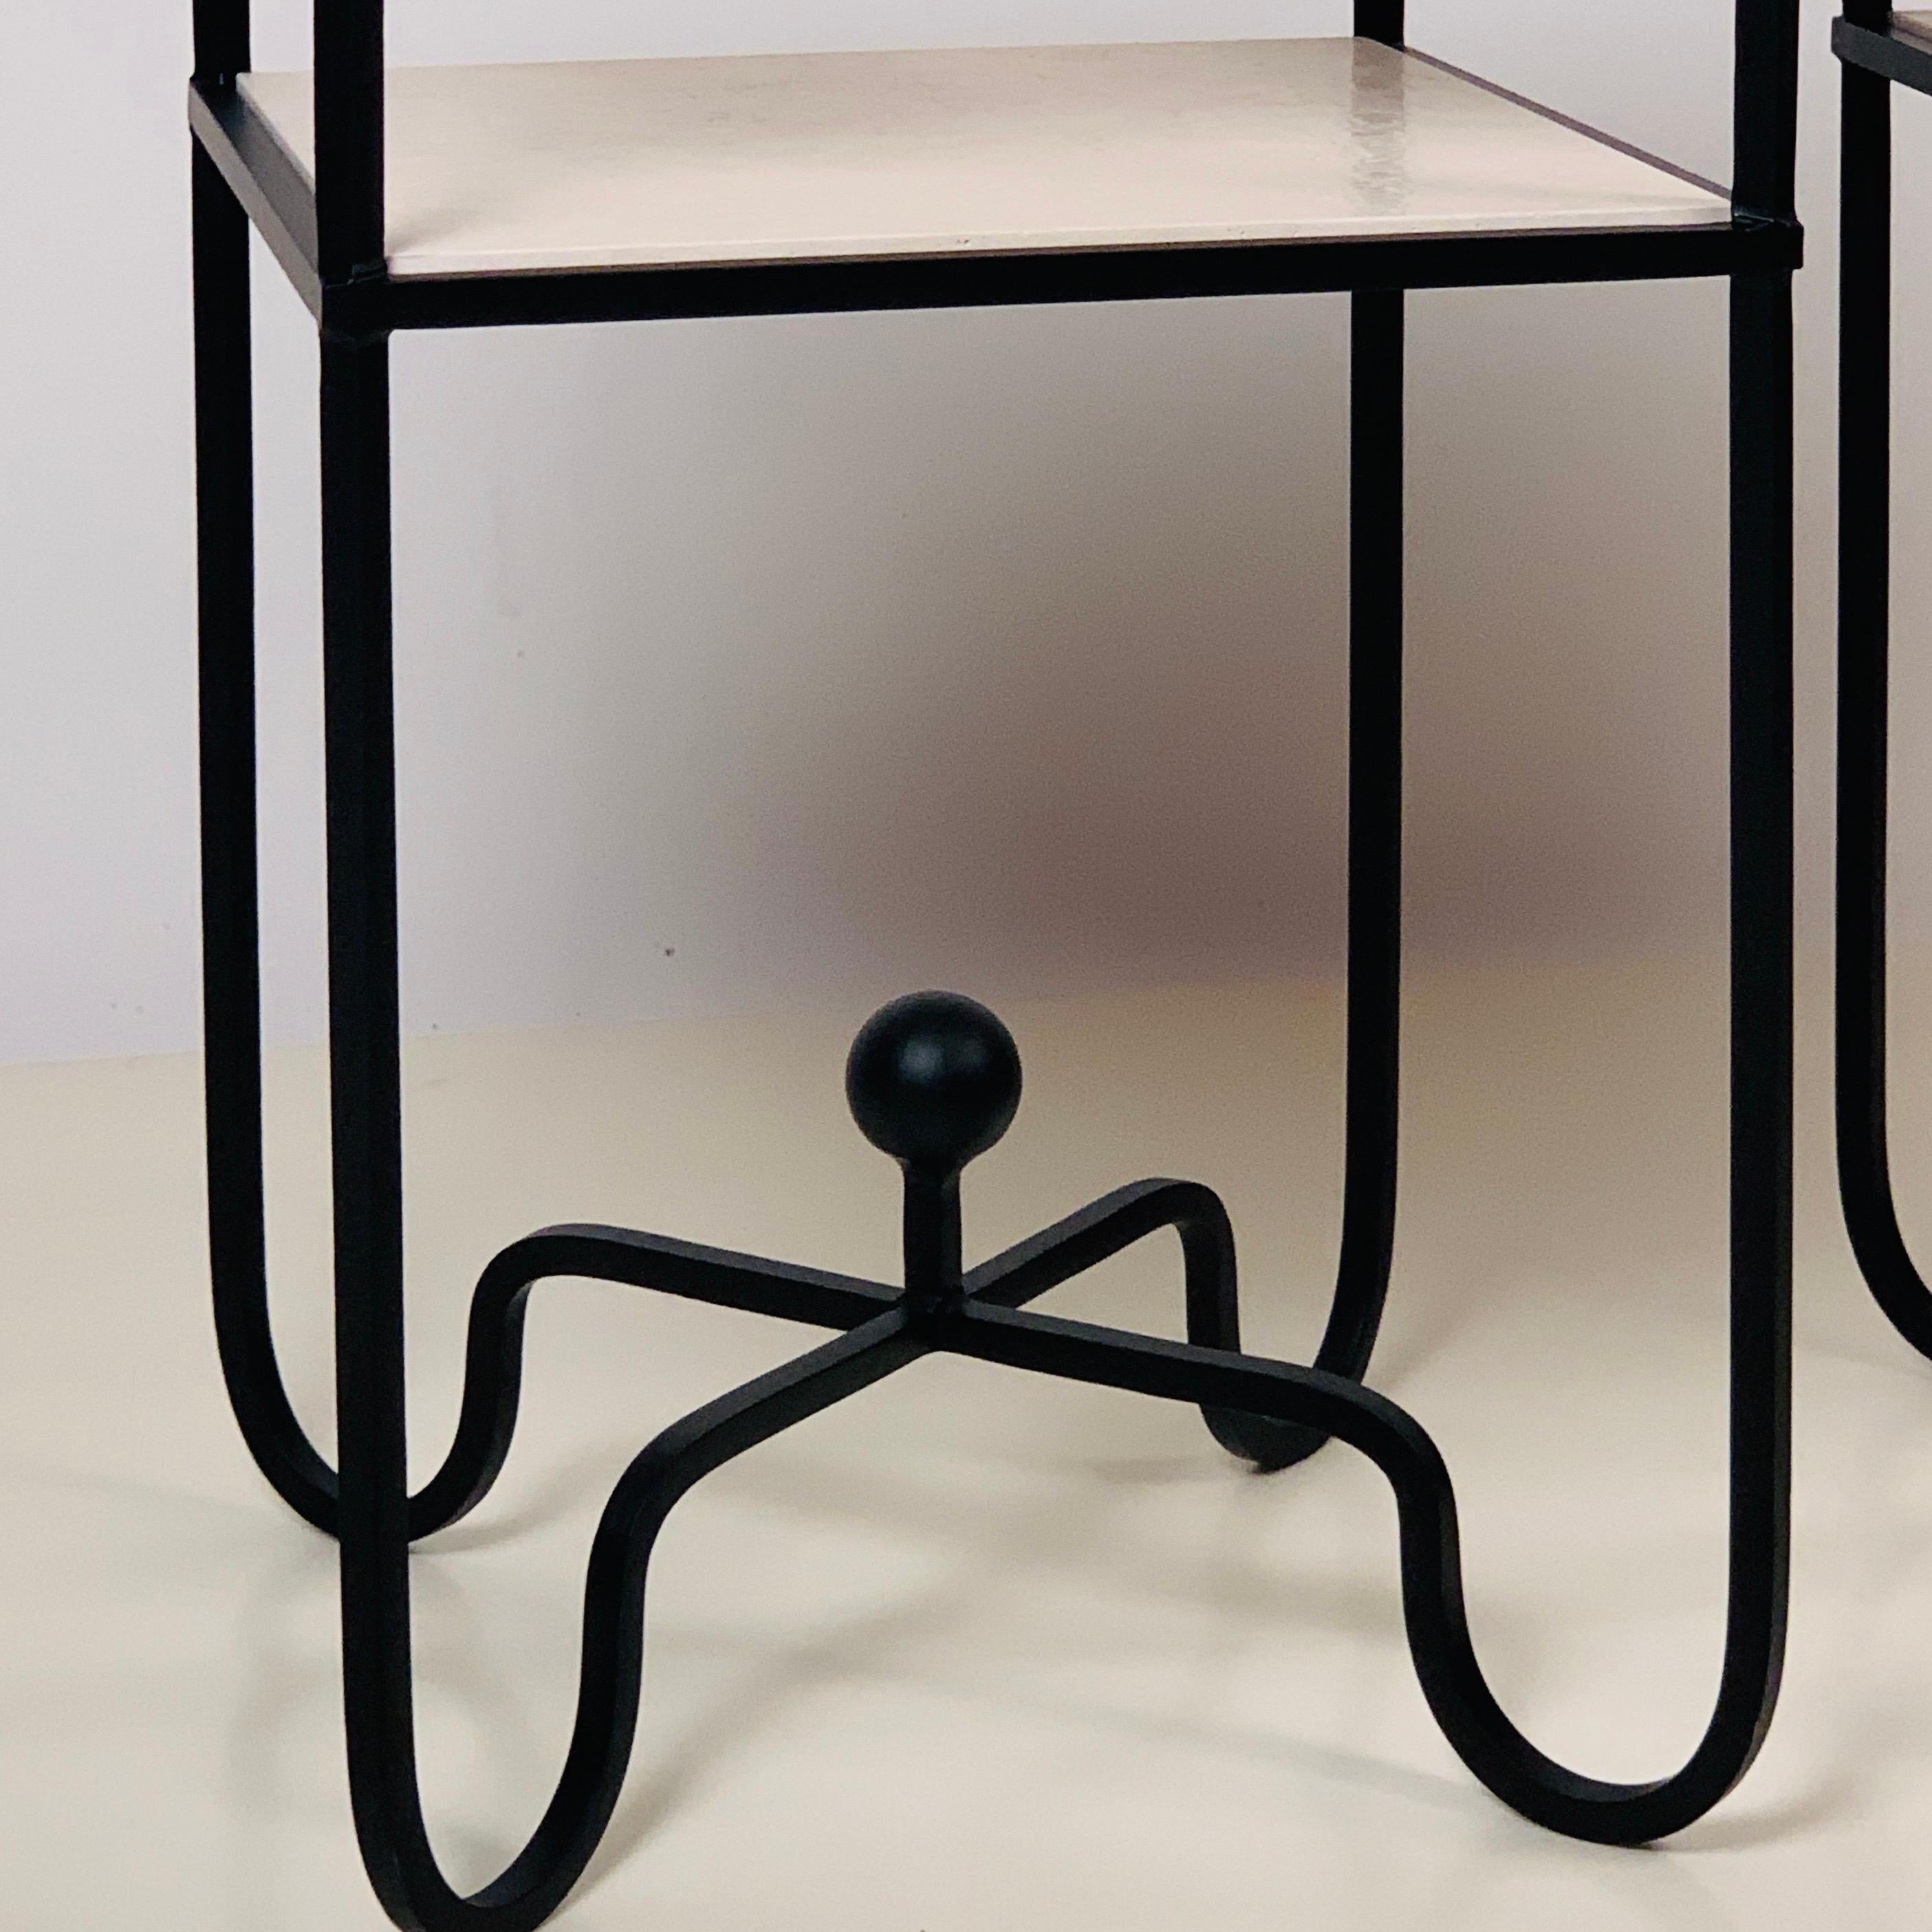 European Pair of 2-Tier Entretoise Side Tables by Design Frères For Sale